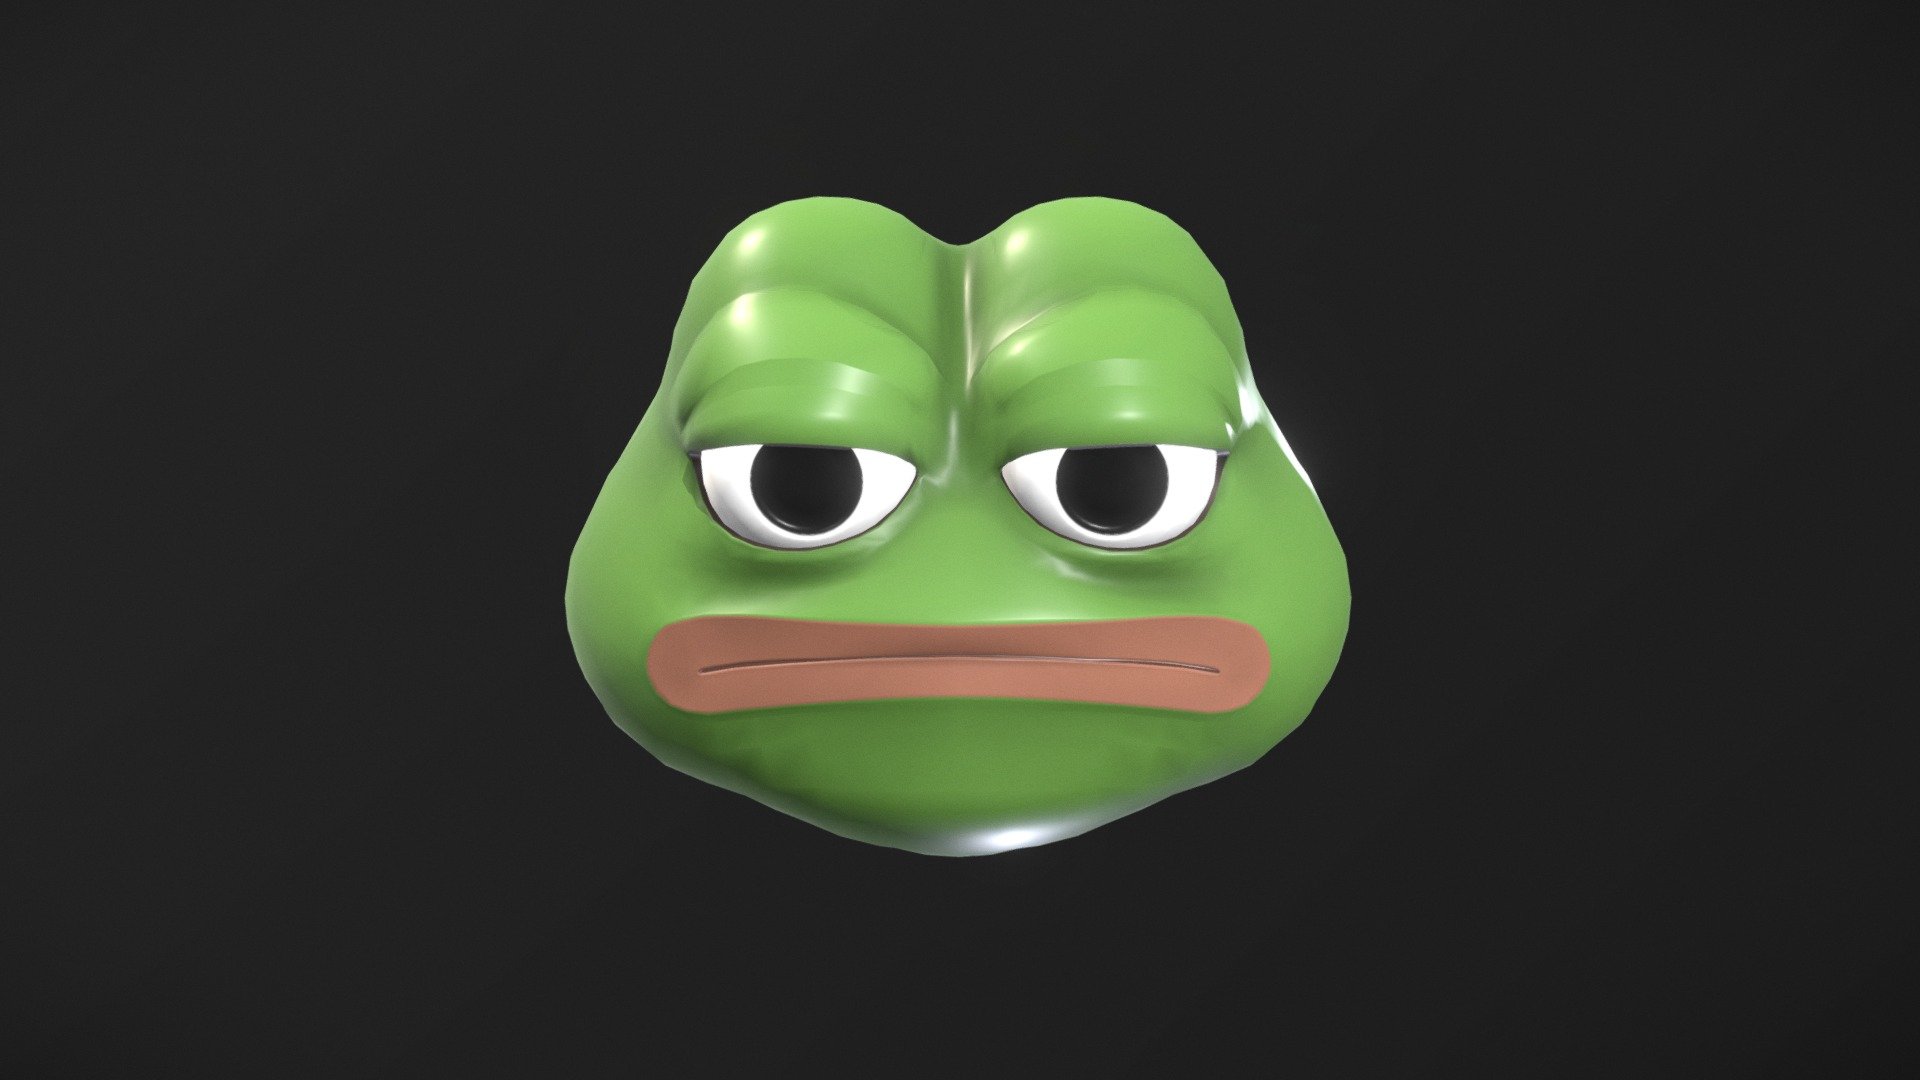 I made a pepe base mesh so that you don't have to. Enjoy!

Features:


Full quad, optimised, smoothable geometry
UV mapped with 4K diffuse textures
Native .blend file (2.93+)
Low poly, game ready
Has a mouth cavity

&ldquo;Pepe the Frog is an Internet meme consisting of a green anthropomorphic frog with a humanoid body. Pepe originated in a 2005 comic by Matt Furie called Boy's Club. It became an Internet meme when its popularity steadily grew across Myspace, Gaia Online and 4chan in 2008. By 2015, it had become one of the most popular memes used on 4chan and Tumblr. Different types of Pepe include &ldquo;Sad Frog